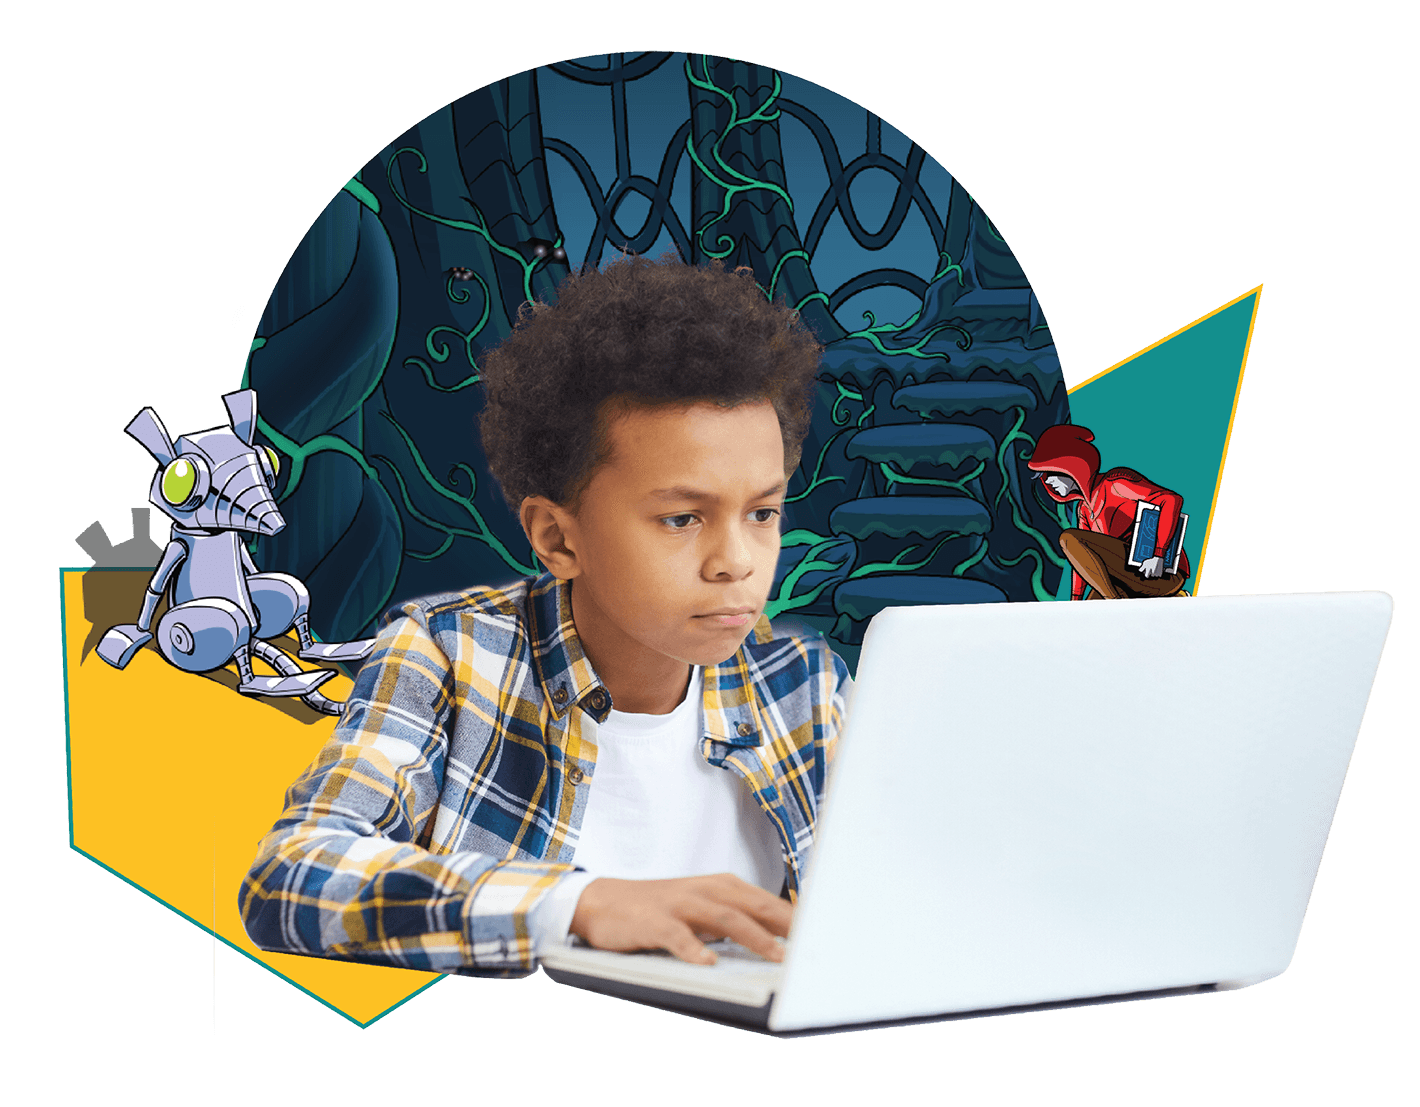 Young boy concentrating on laptop with imaginative illustrations of robots and ſֱ Reading graphics in the background.